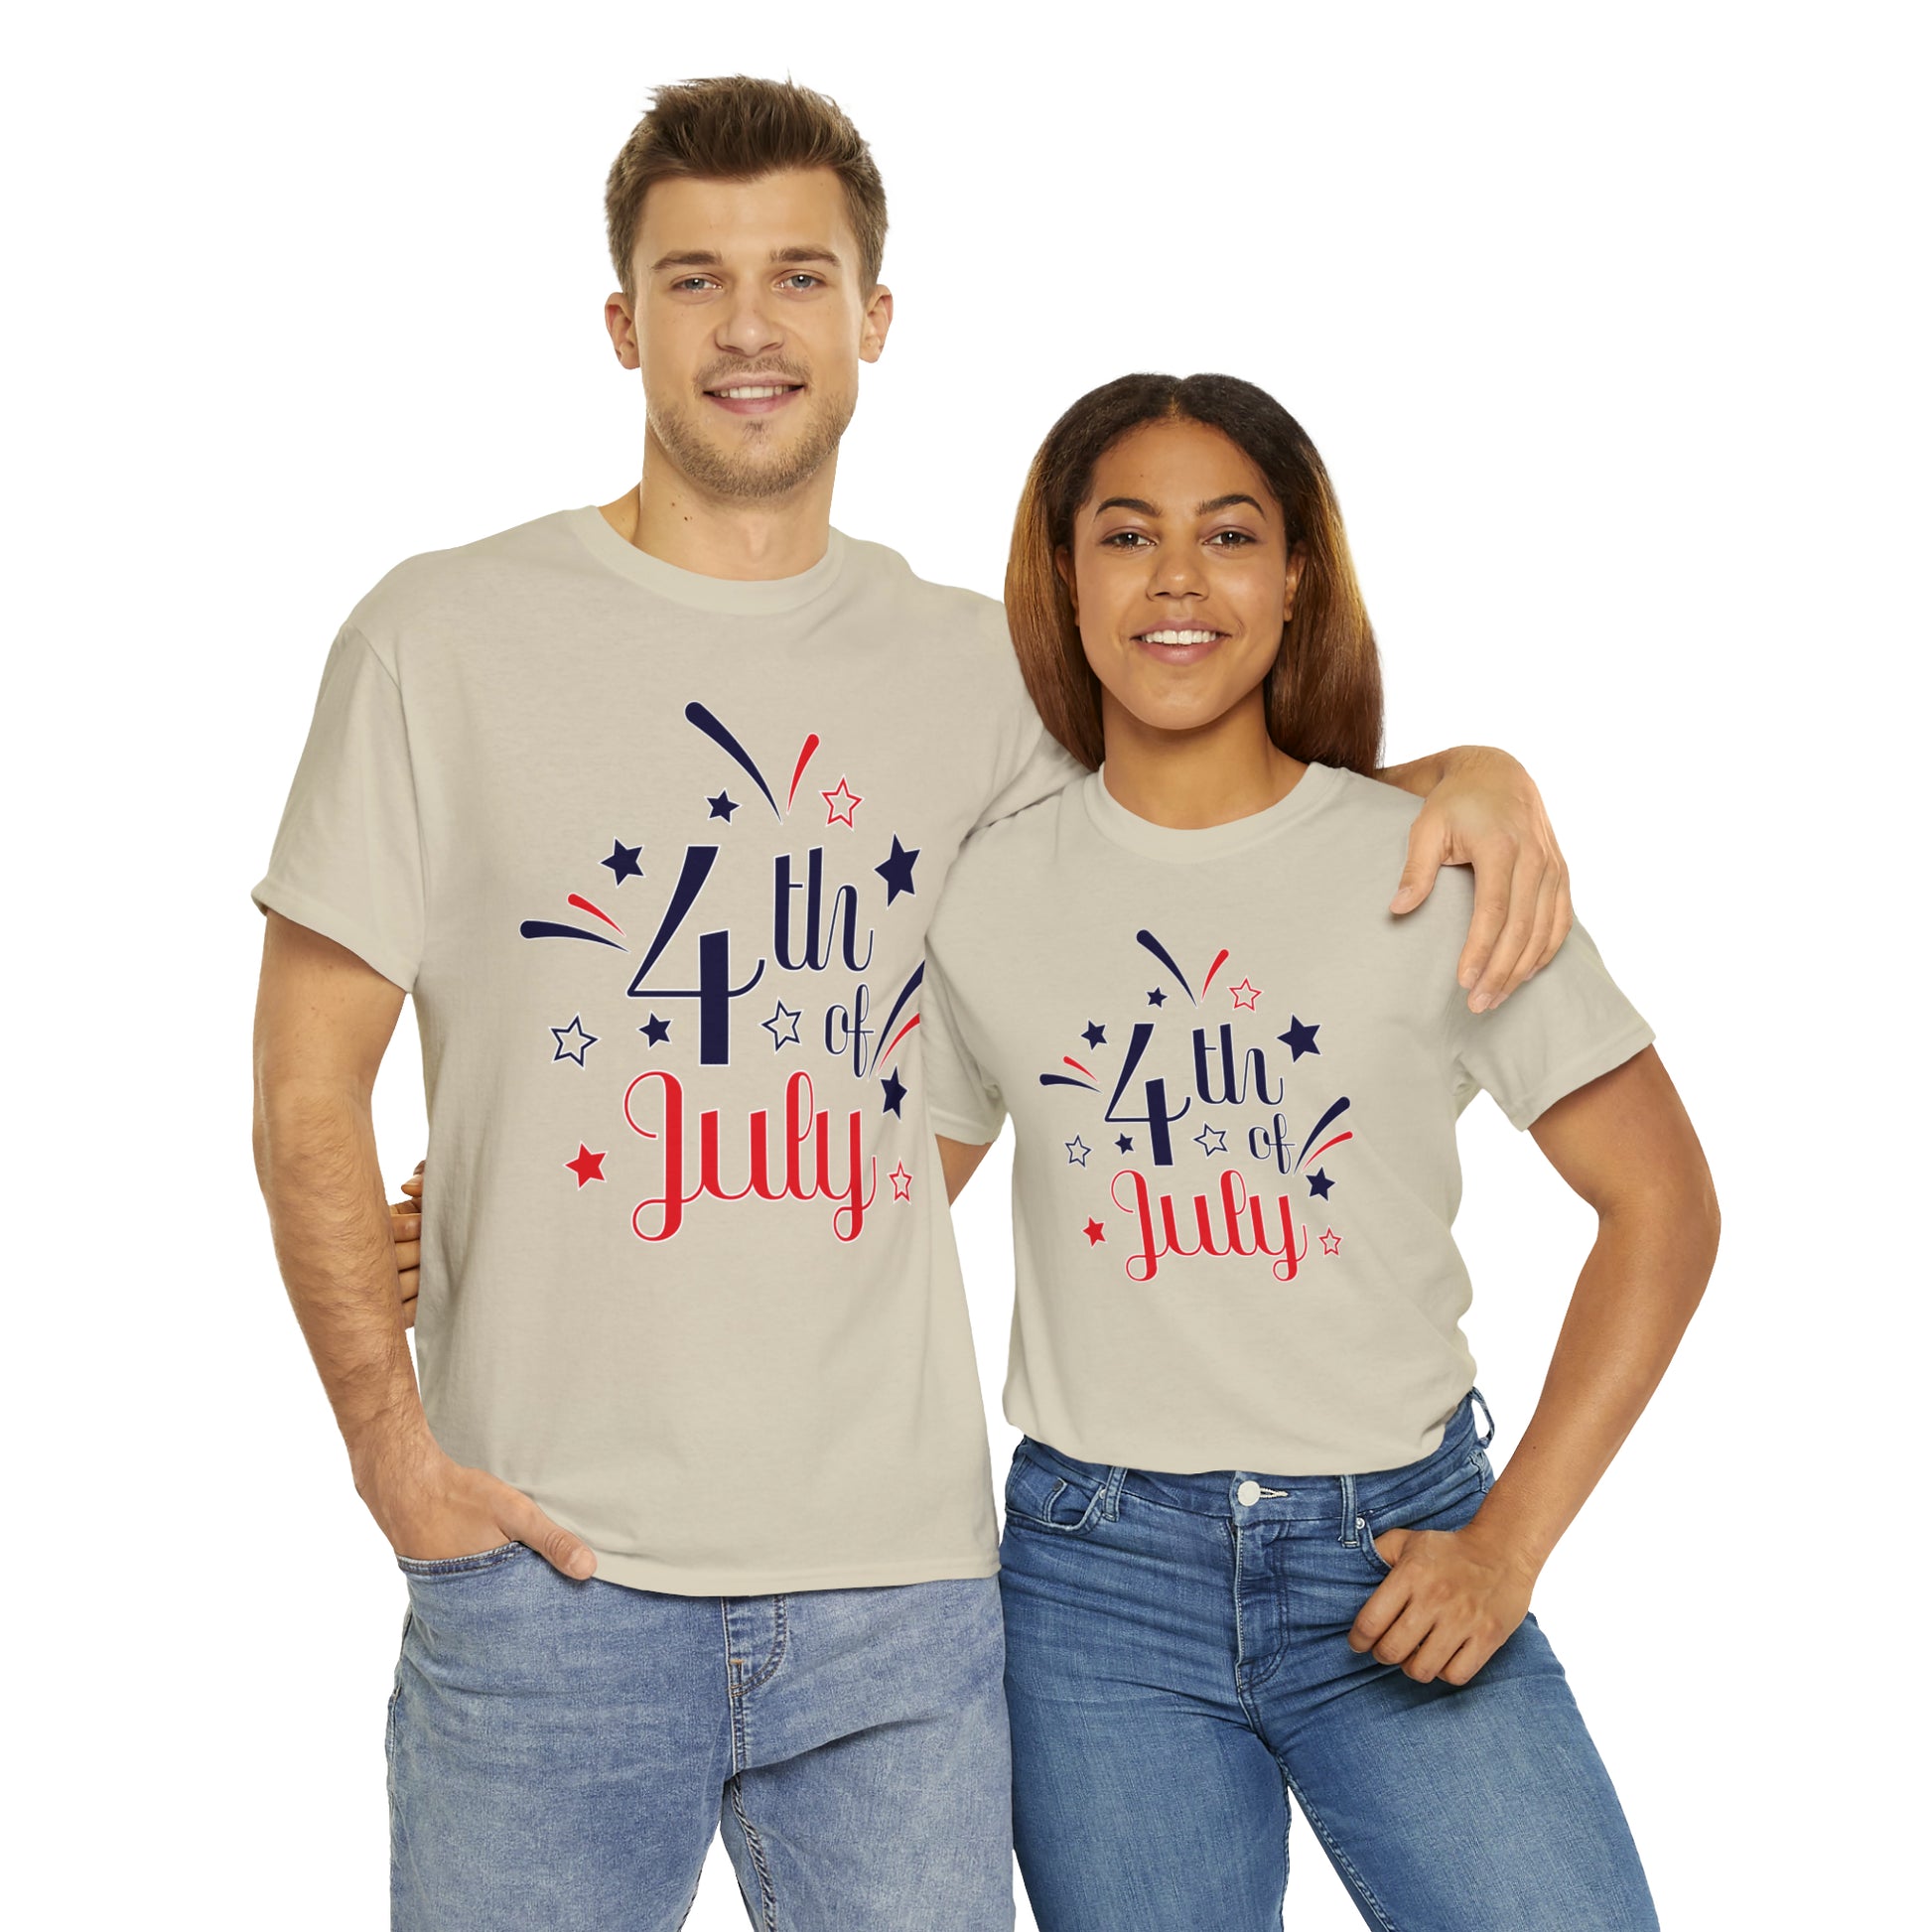 Mock up of a man and a woman wearing the Sand t-shirt